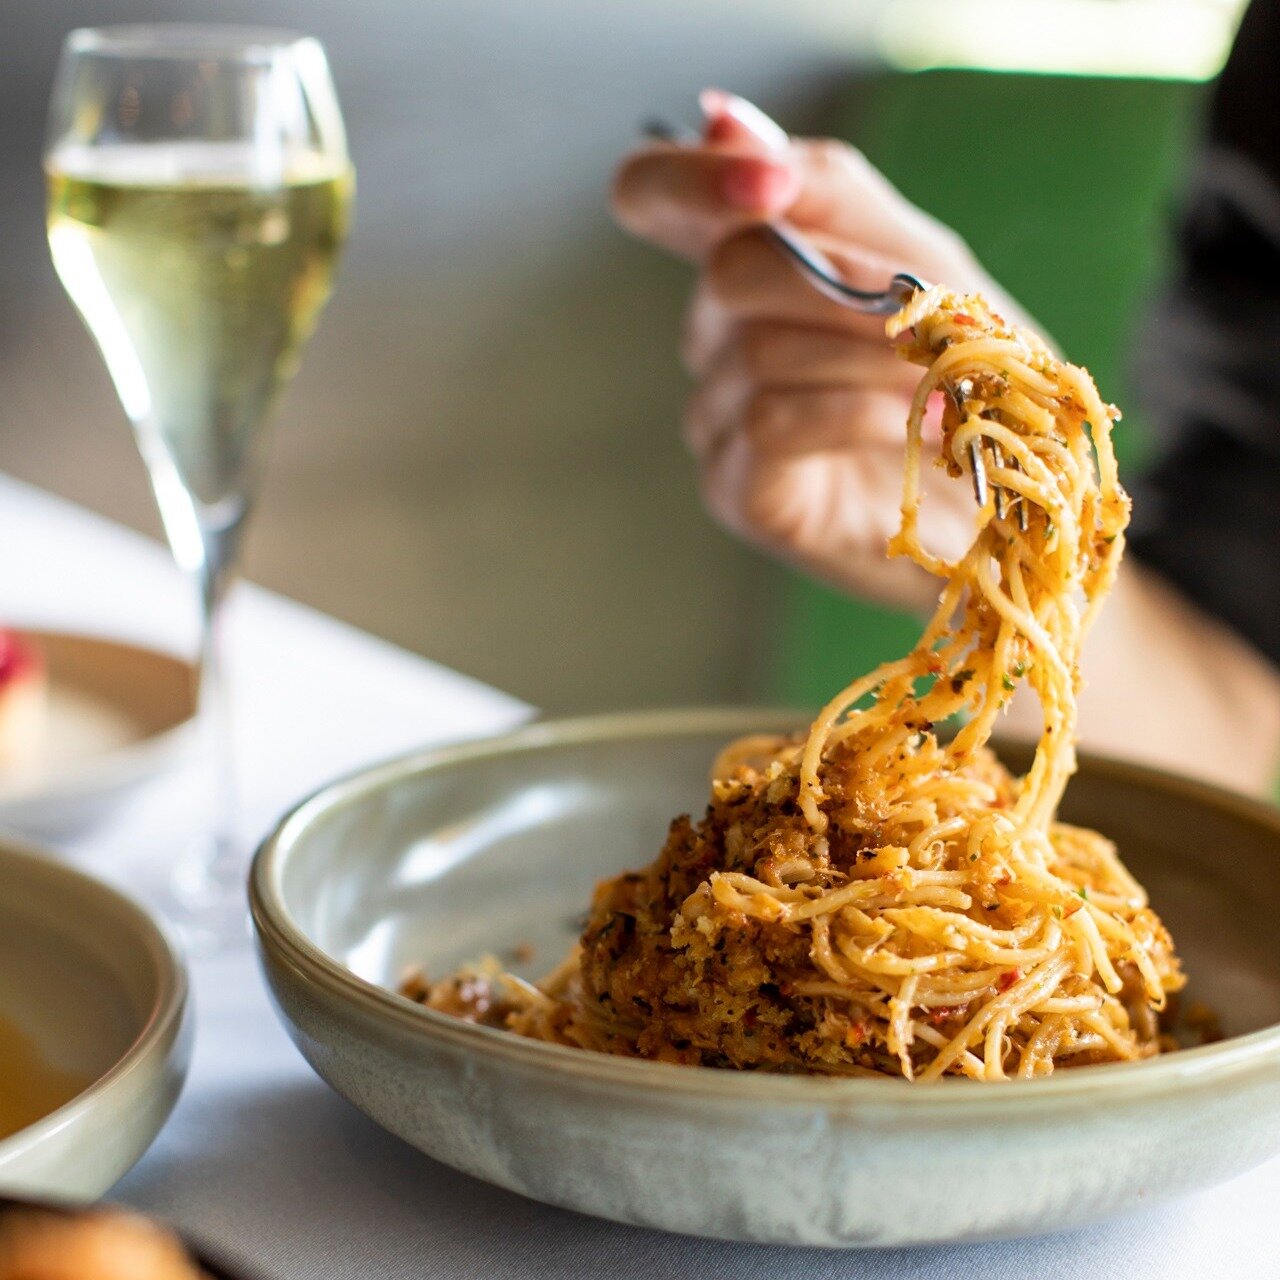 $40 PASTA &amp; VINO
EVERY WEDNESDAY NIGHT

The ultimate midweek catch up with family or friends! Your choice of pasta + a glass of wine for just $40! Click on bio to book.